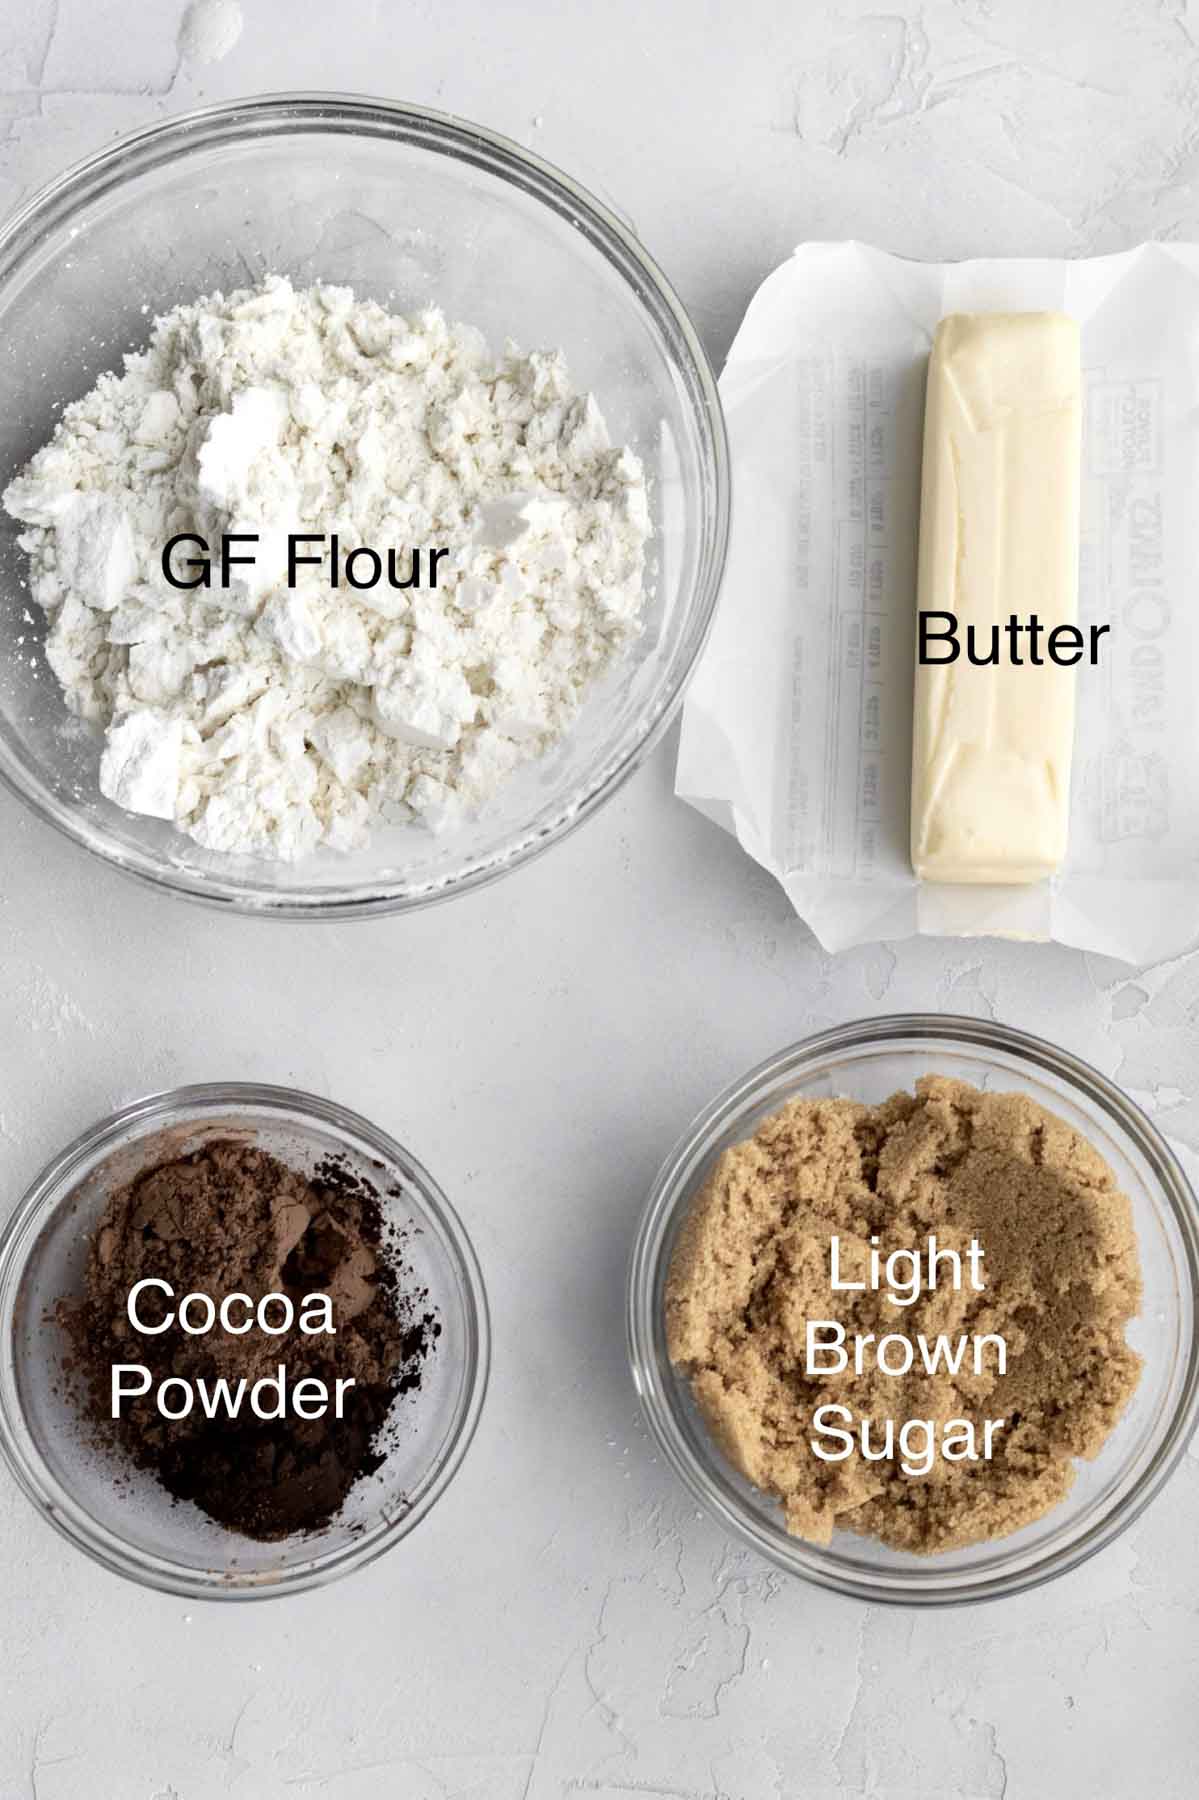 The ingredients for the top crumbles with their text names.